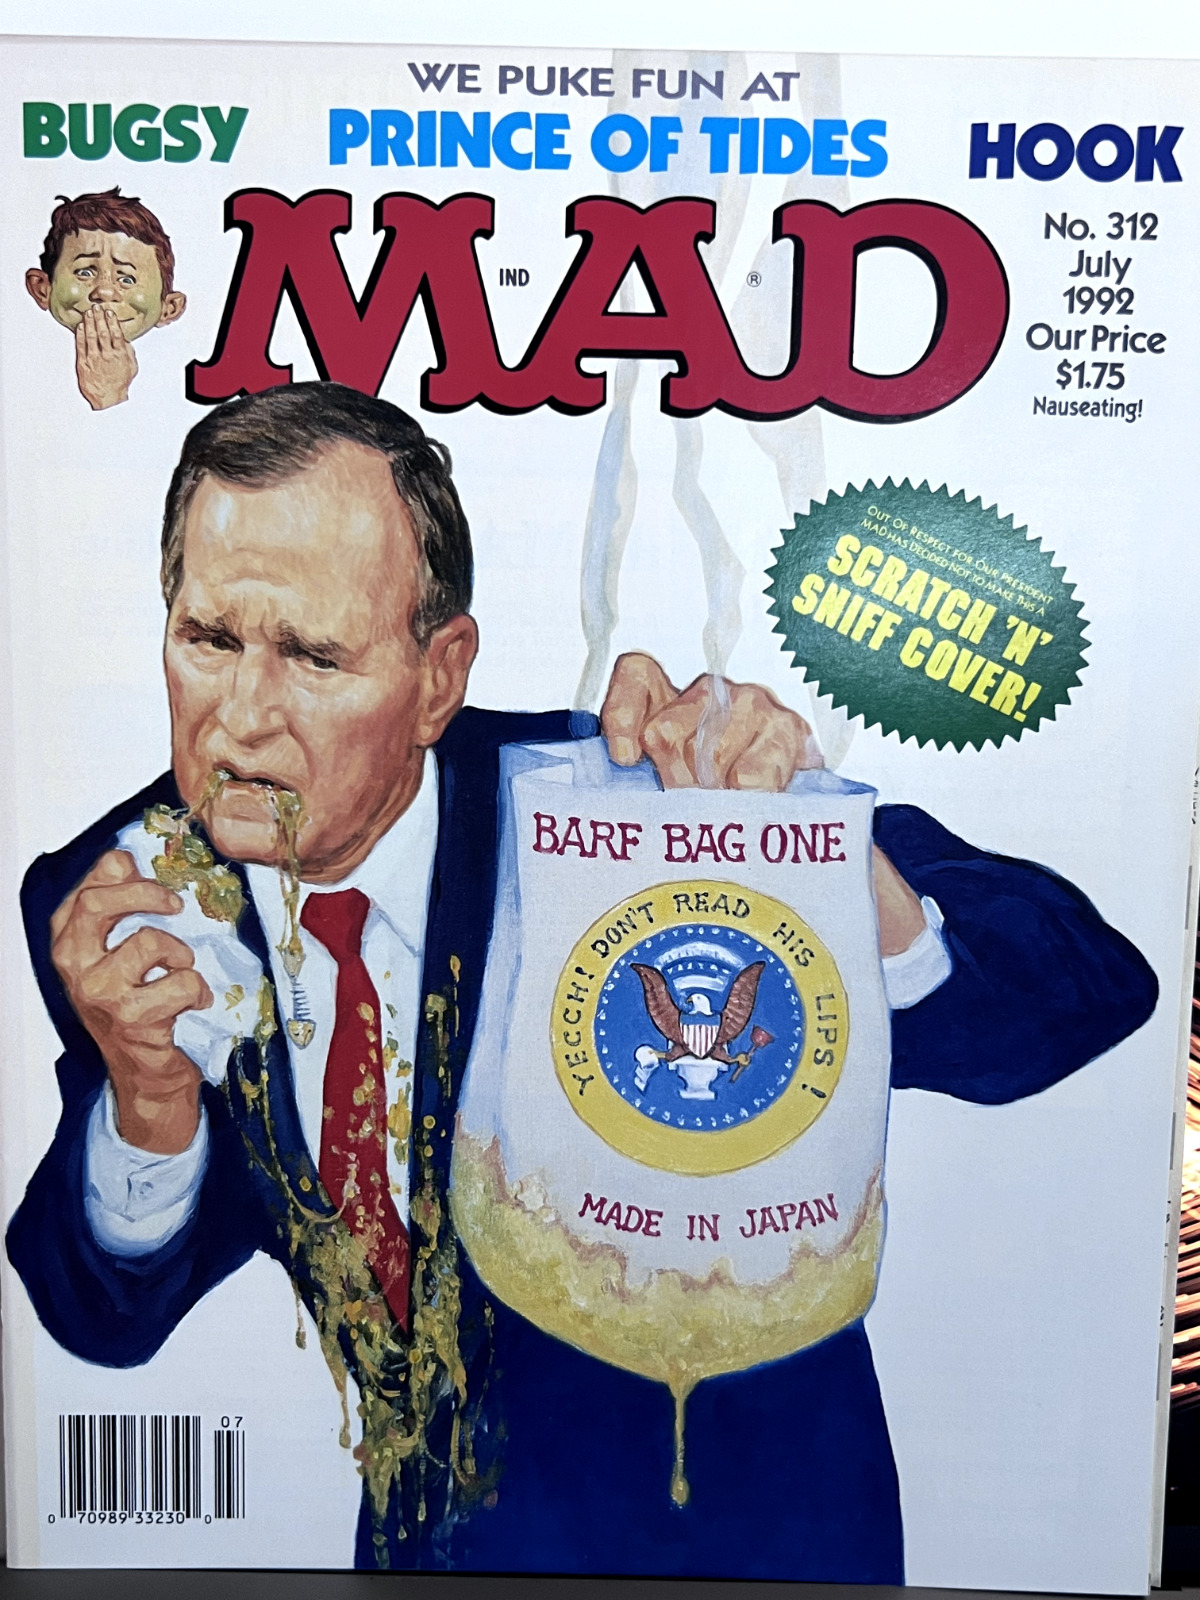 Mad Magazine #312 Bugsy - Prince of Tides great shape